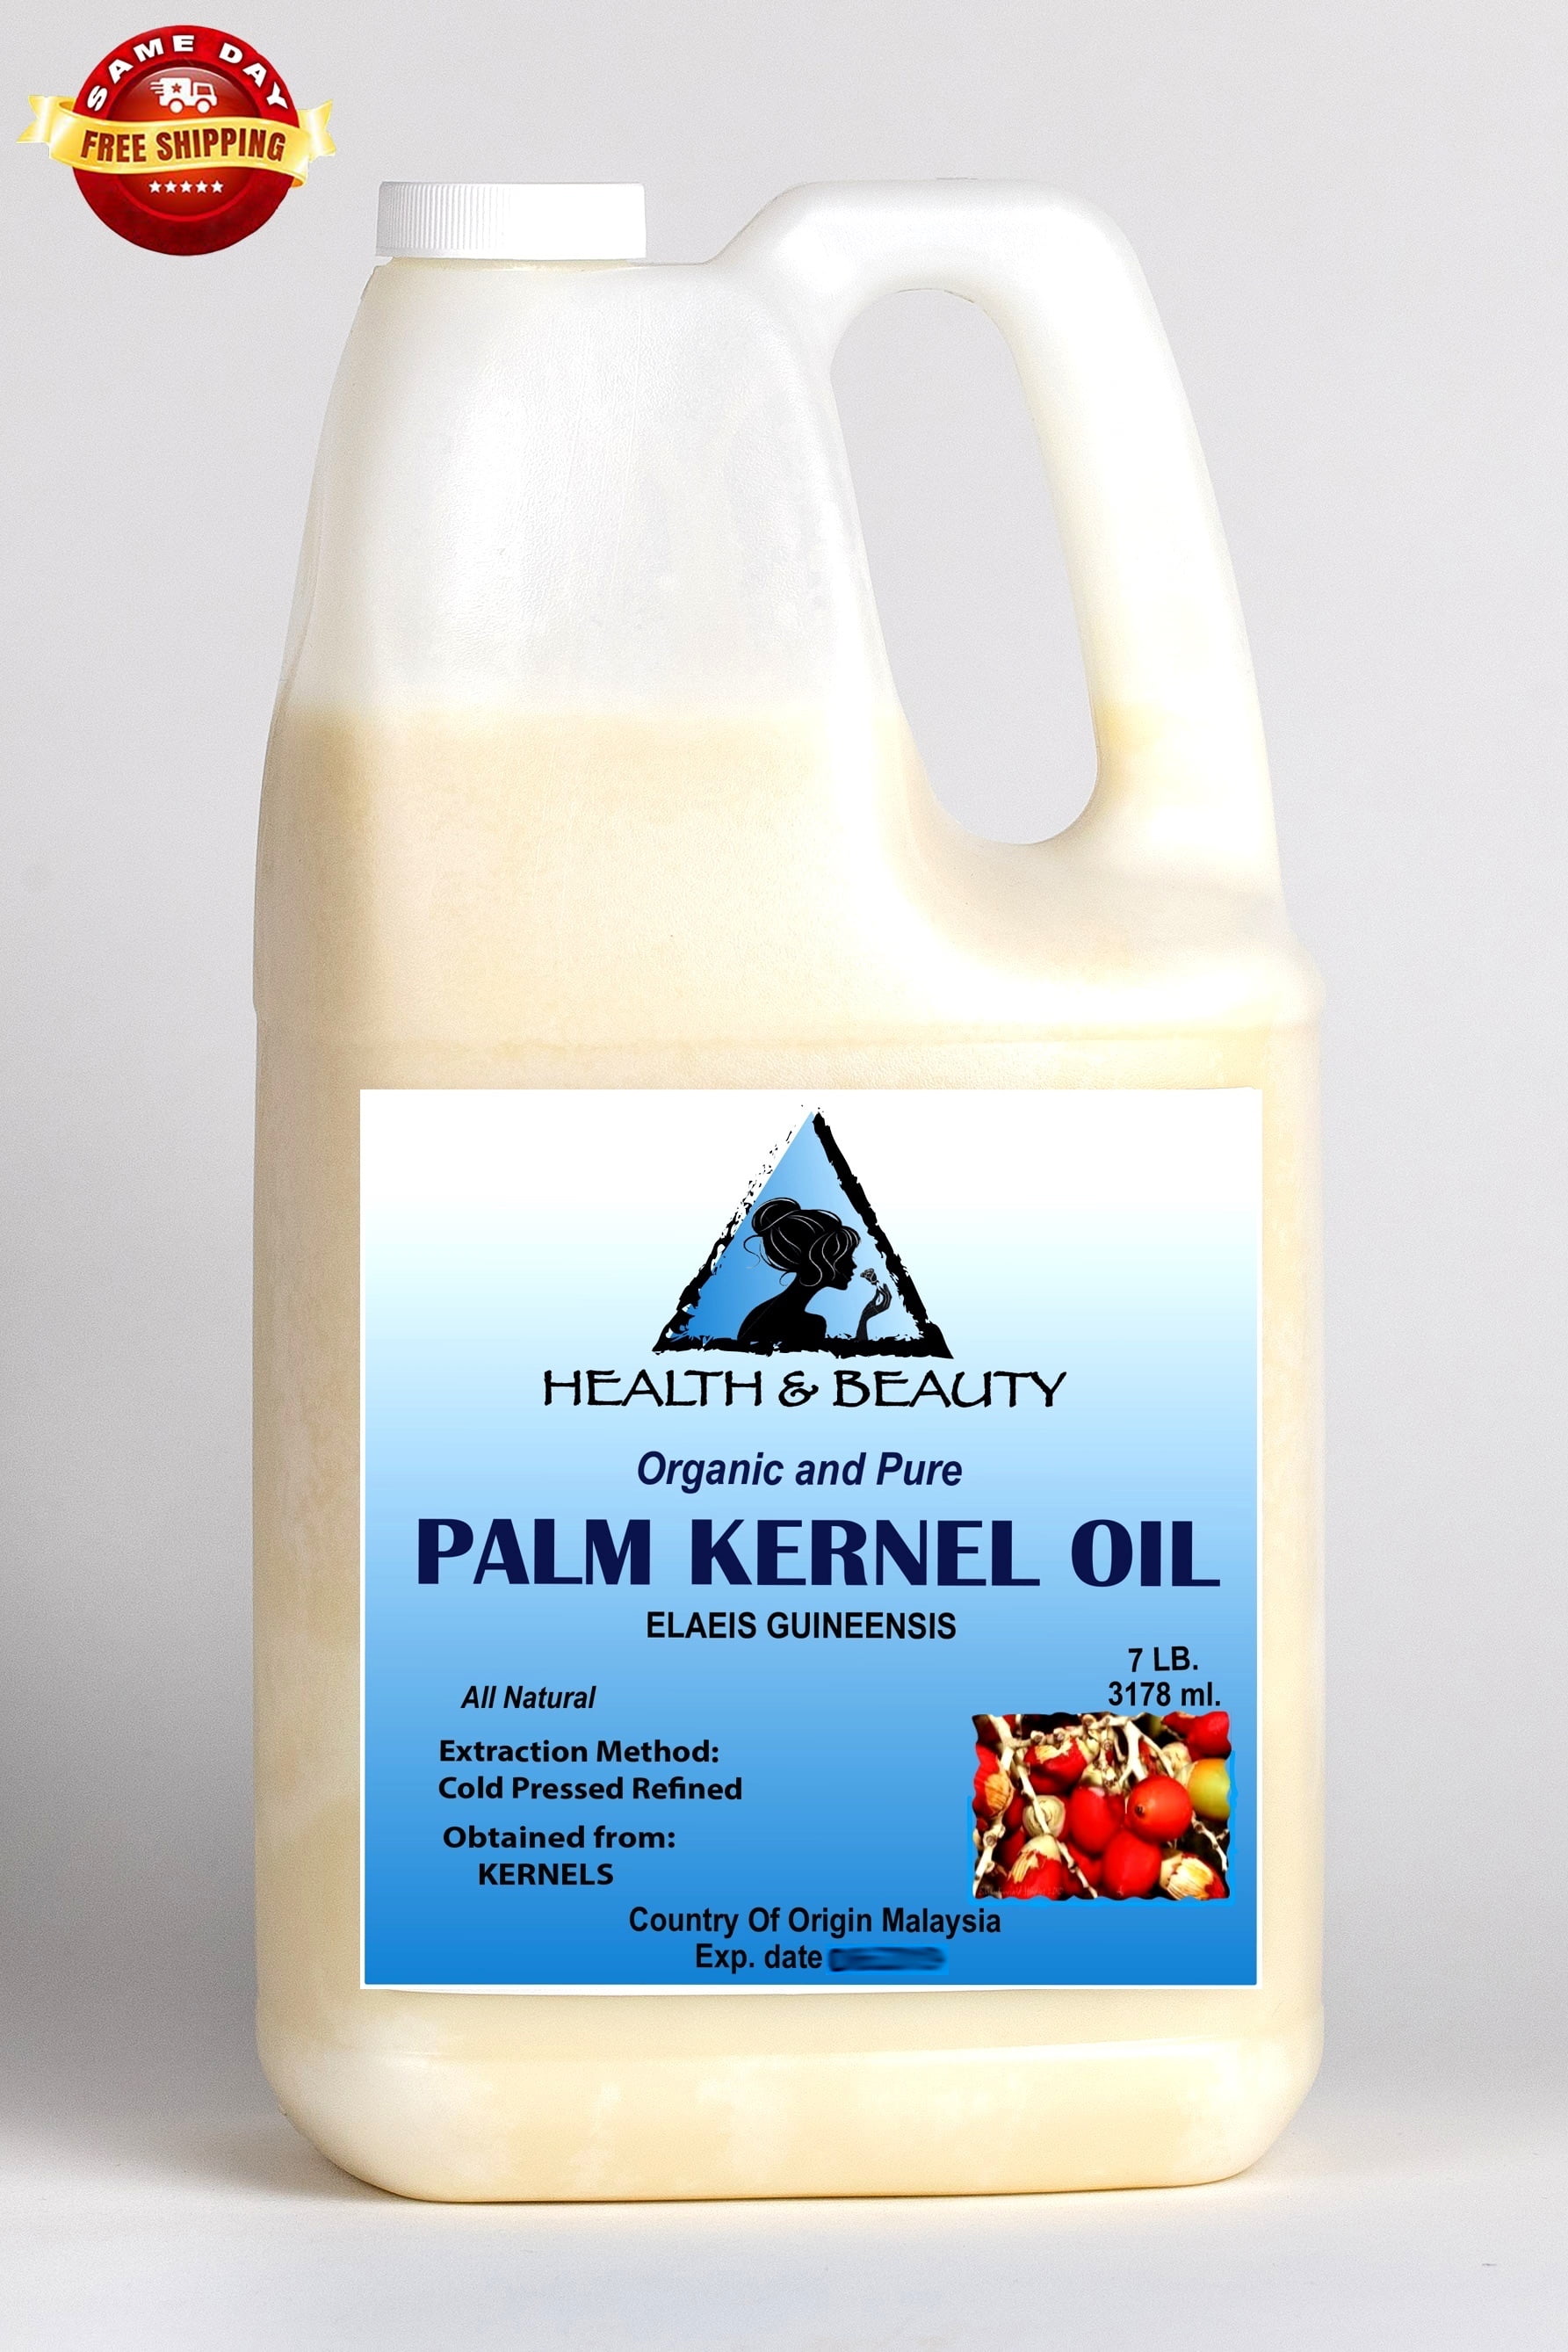 PALM KERNEL OIL ORGANIC CARRIER COLD PRESSED SUSTAINABLE NATURAL 100% PURE  7 LB 